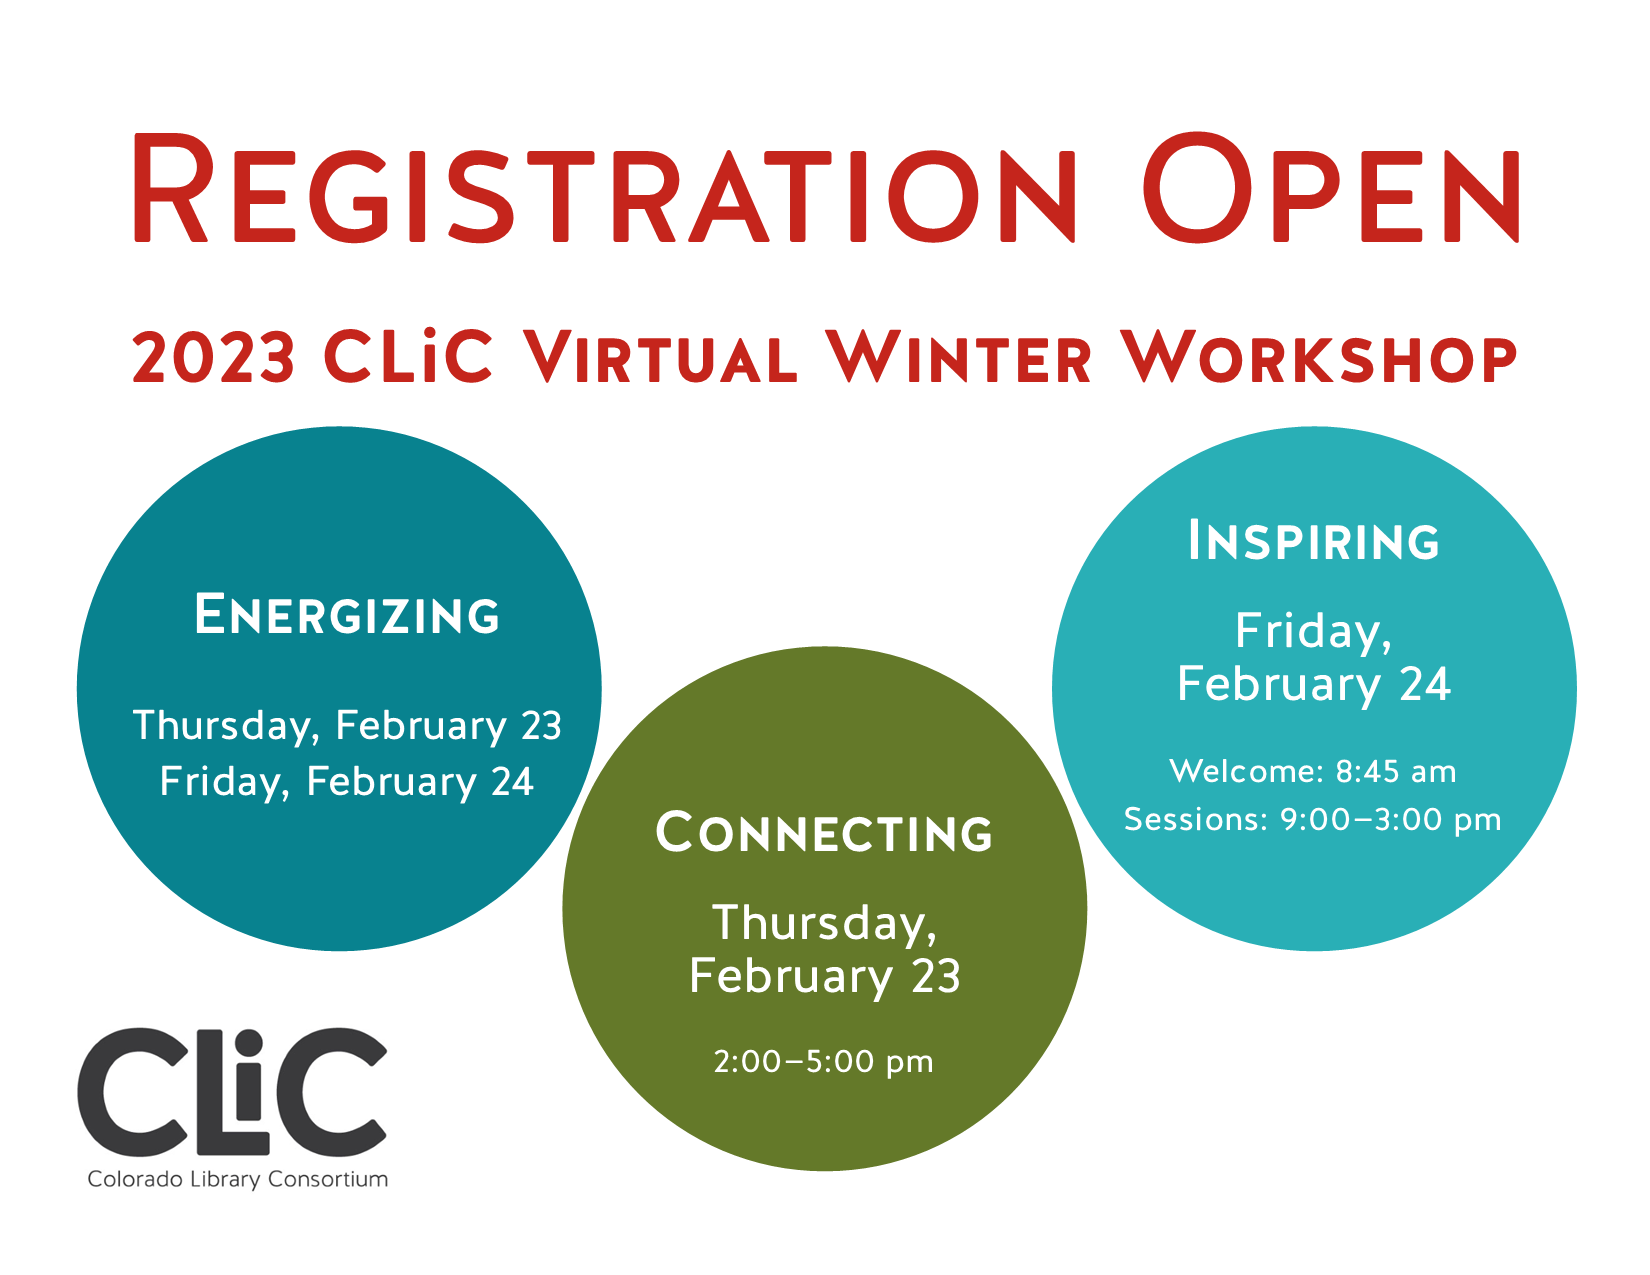 Registration Open 2023 Virtual Winter Workshop Energizing Thursday, February 23 Friday, February 24 Connecting Thursday, February 23, 2-5pm Inspiring Friday, February 24 Welcome: 8:45am, Sessions 9-3pm